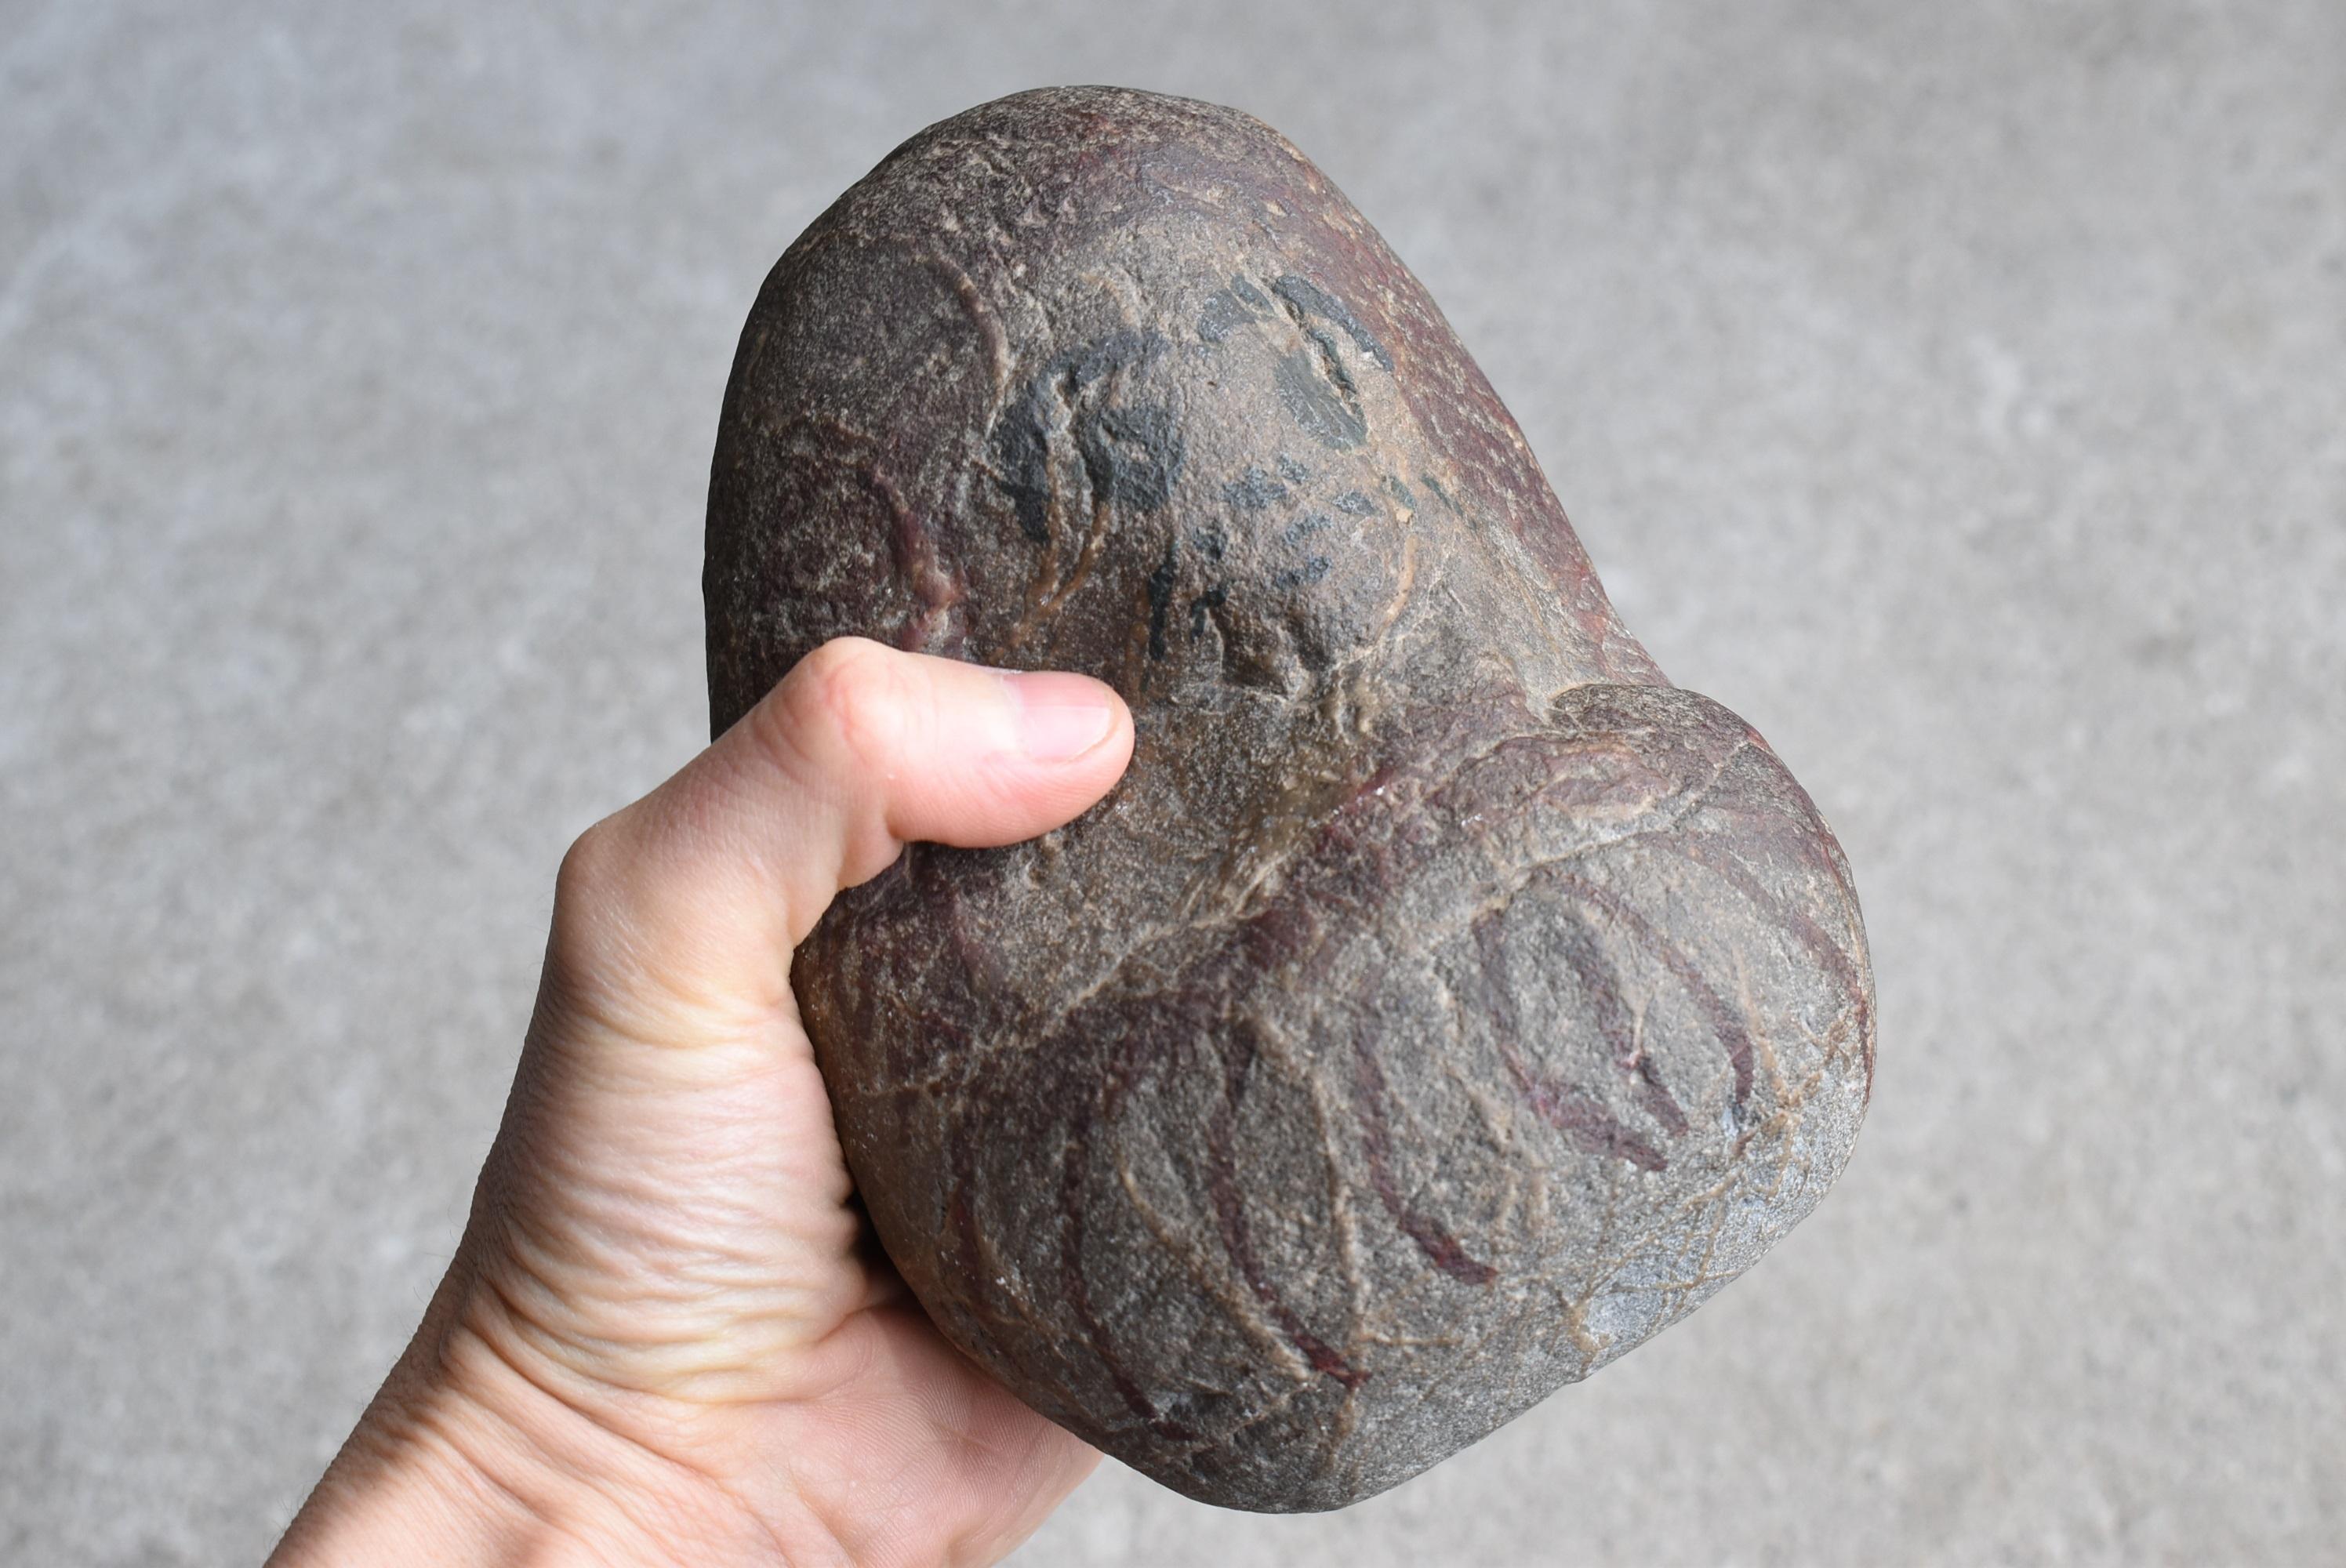 This is an old Japanese stone daruma.
This item is from the early Showa period (1920s-1940s).
This is very rare.

The face must have been drawn on a stone that was found.
It has a lovely expression.
It is very unique.
It is thought to have